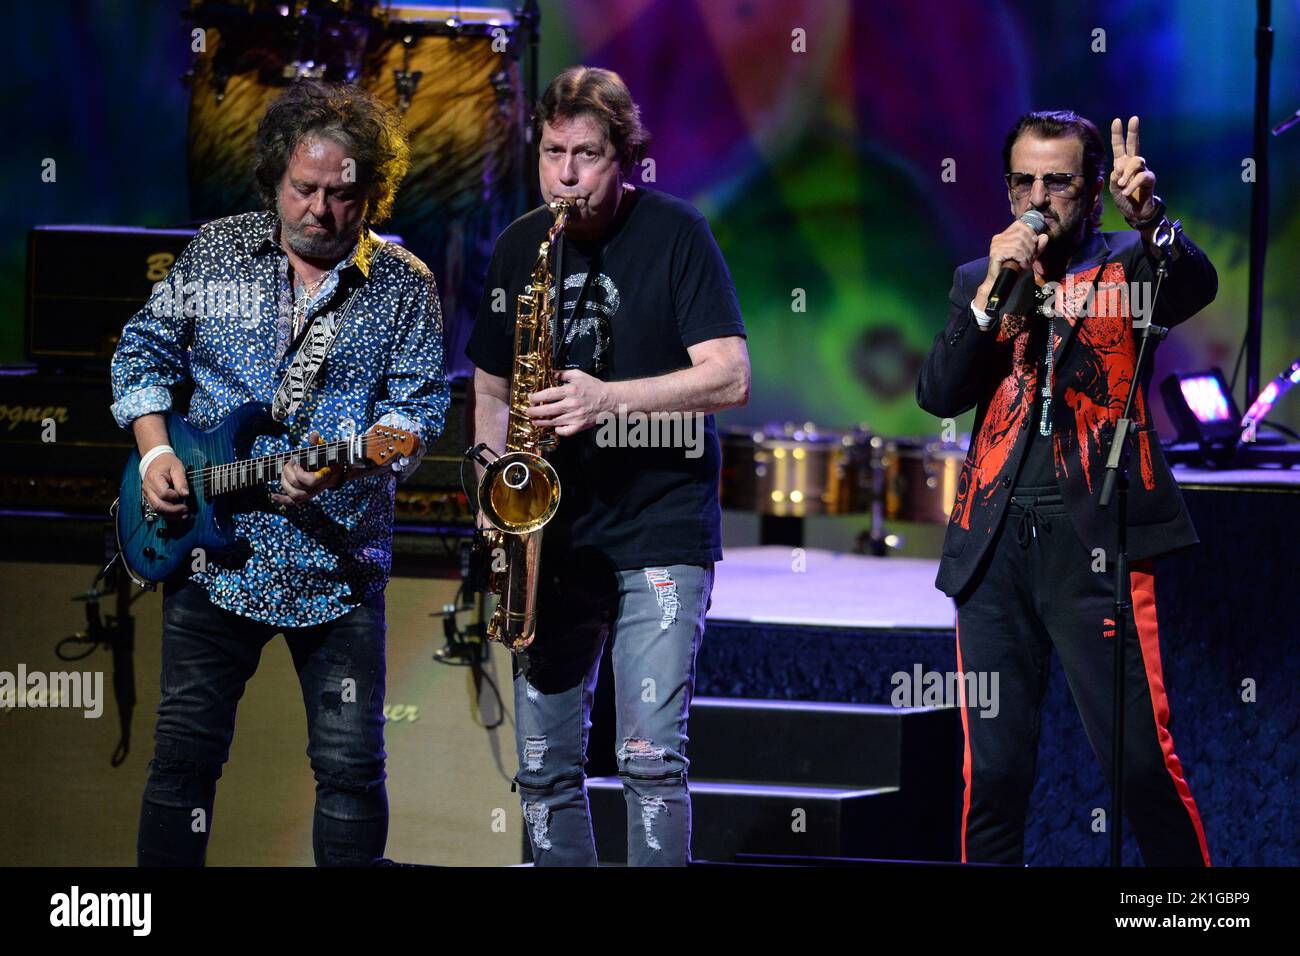 Hollywood FL, USA. 17th Sep, 2022. Ringo Starr and His All Starr Band perform at Hard Rock Live at the Seminole Hard Rock Hotel & Casino on September 17, 2022 in Hollywood, Florida. Credit: Mpi04/Media Punch/Alamy Live News Stock Photo